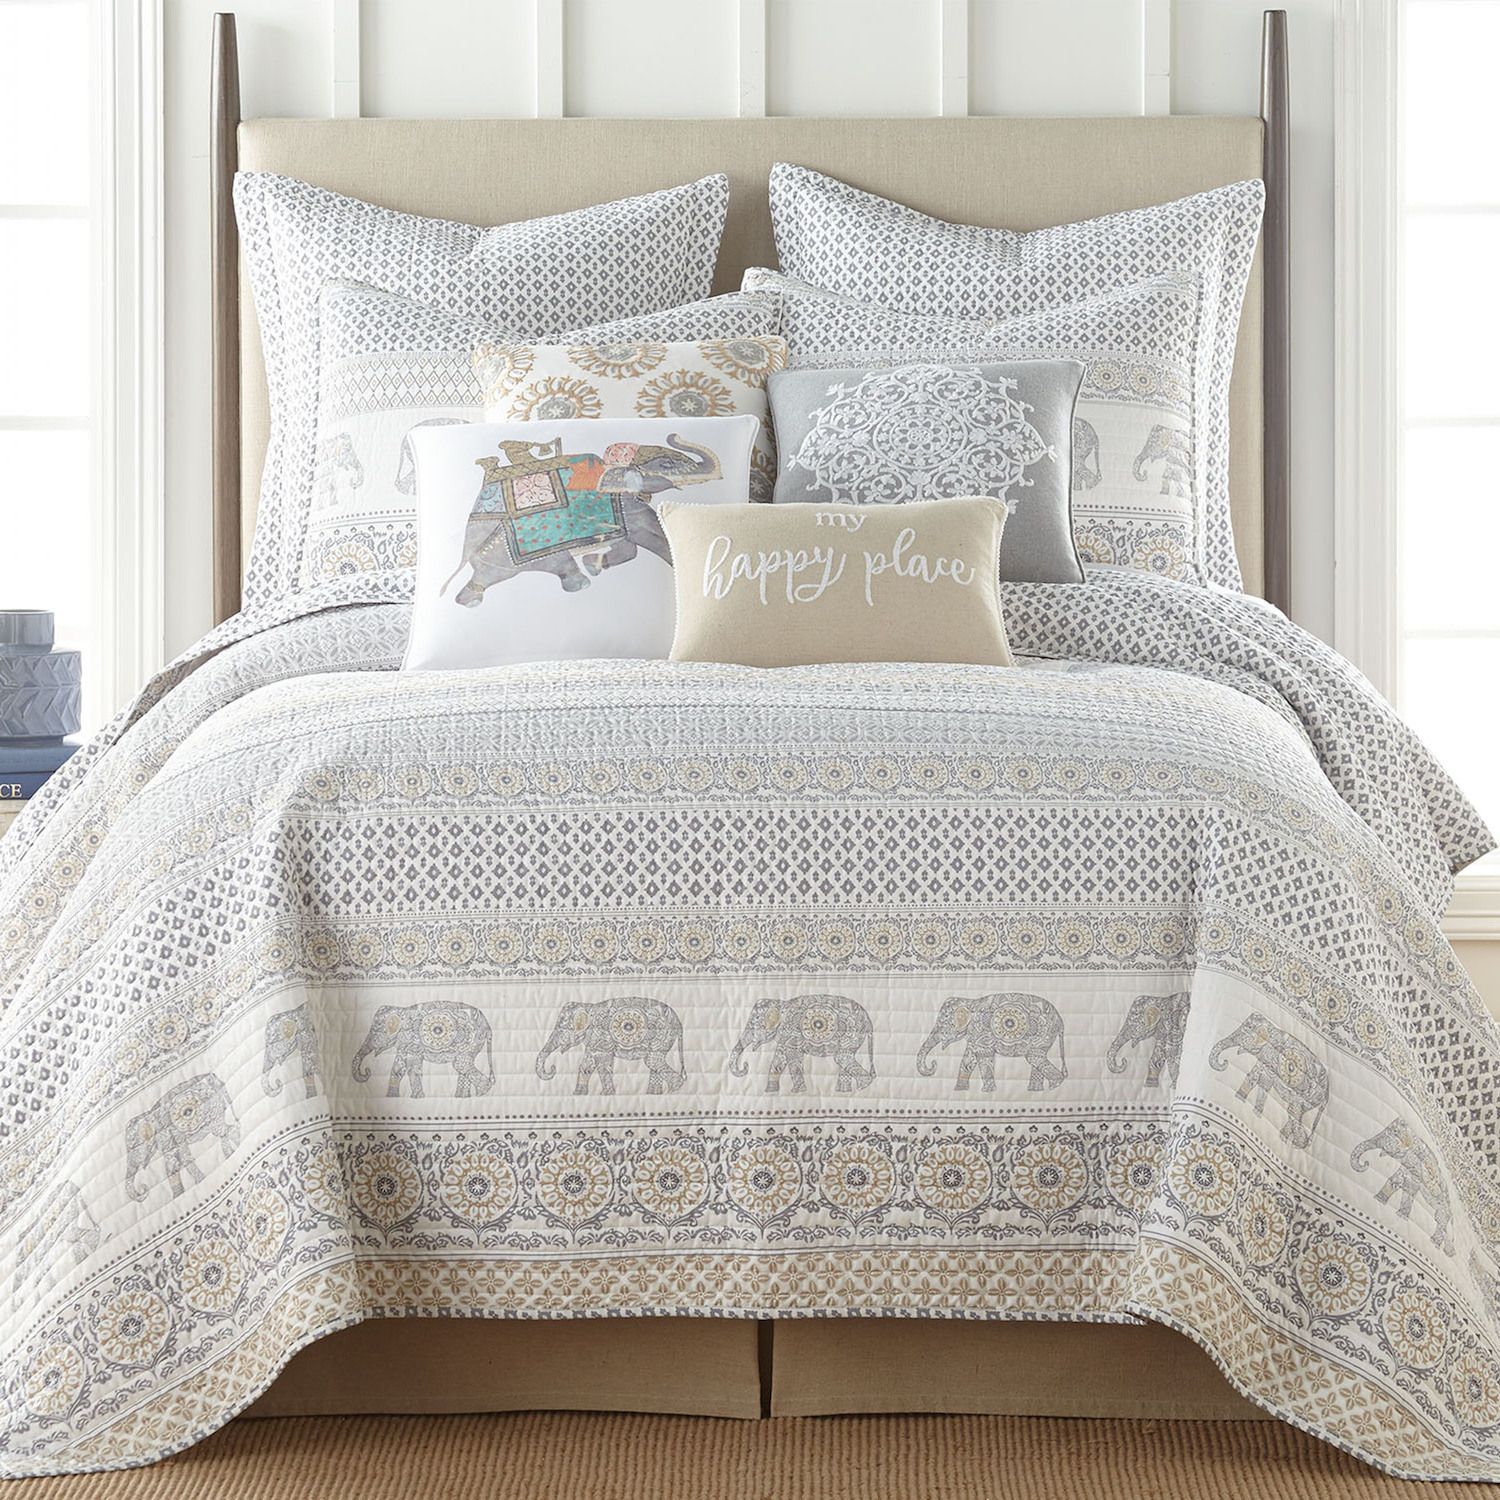 Image for Levtex Home Nacala Quilt Set at Kohl's.